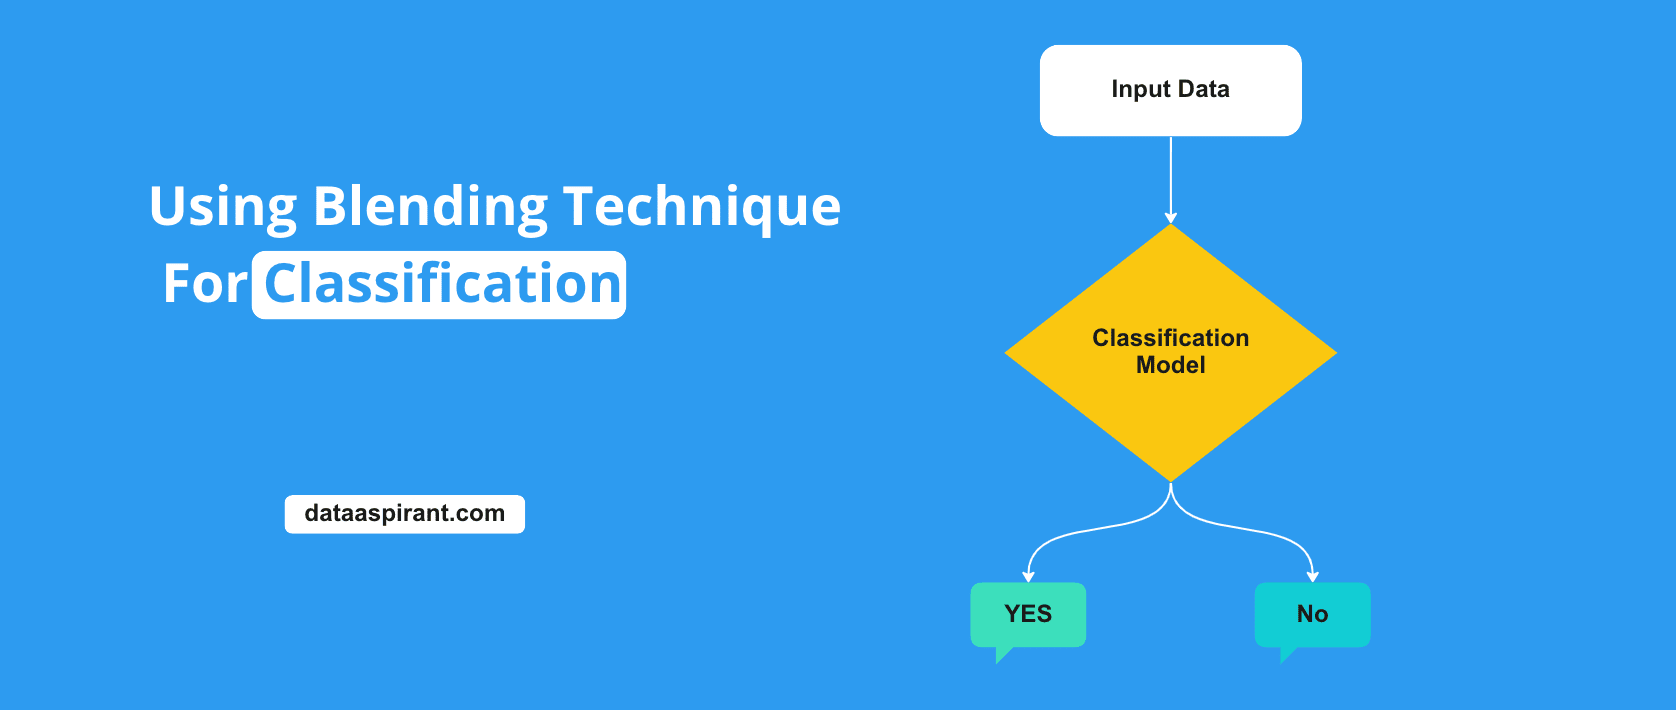 How to Use Blending Technique for Classification